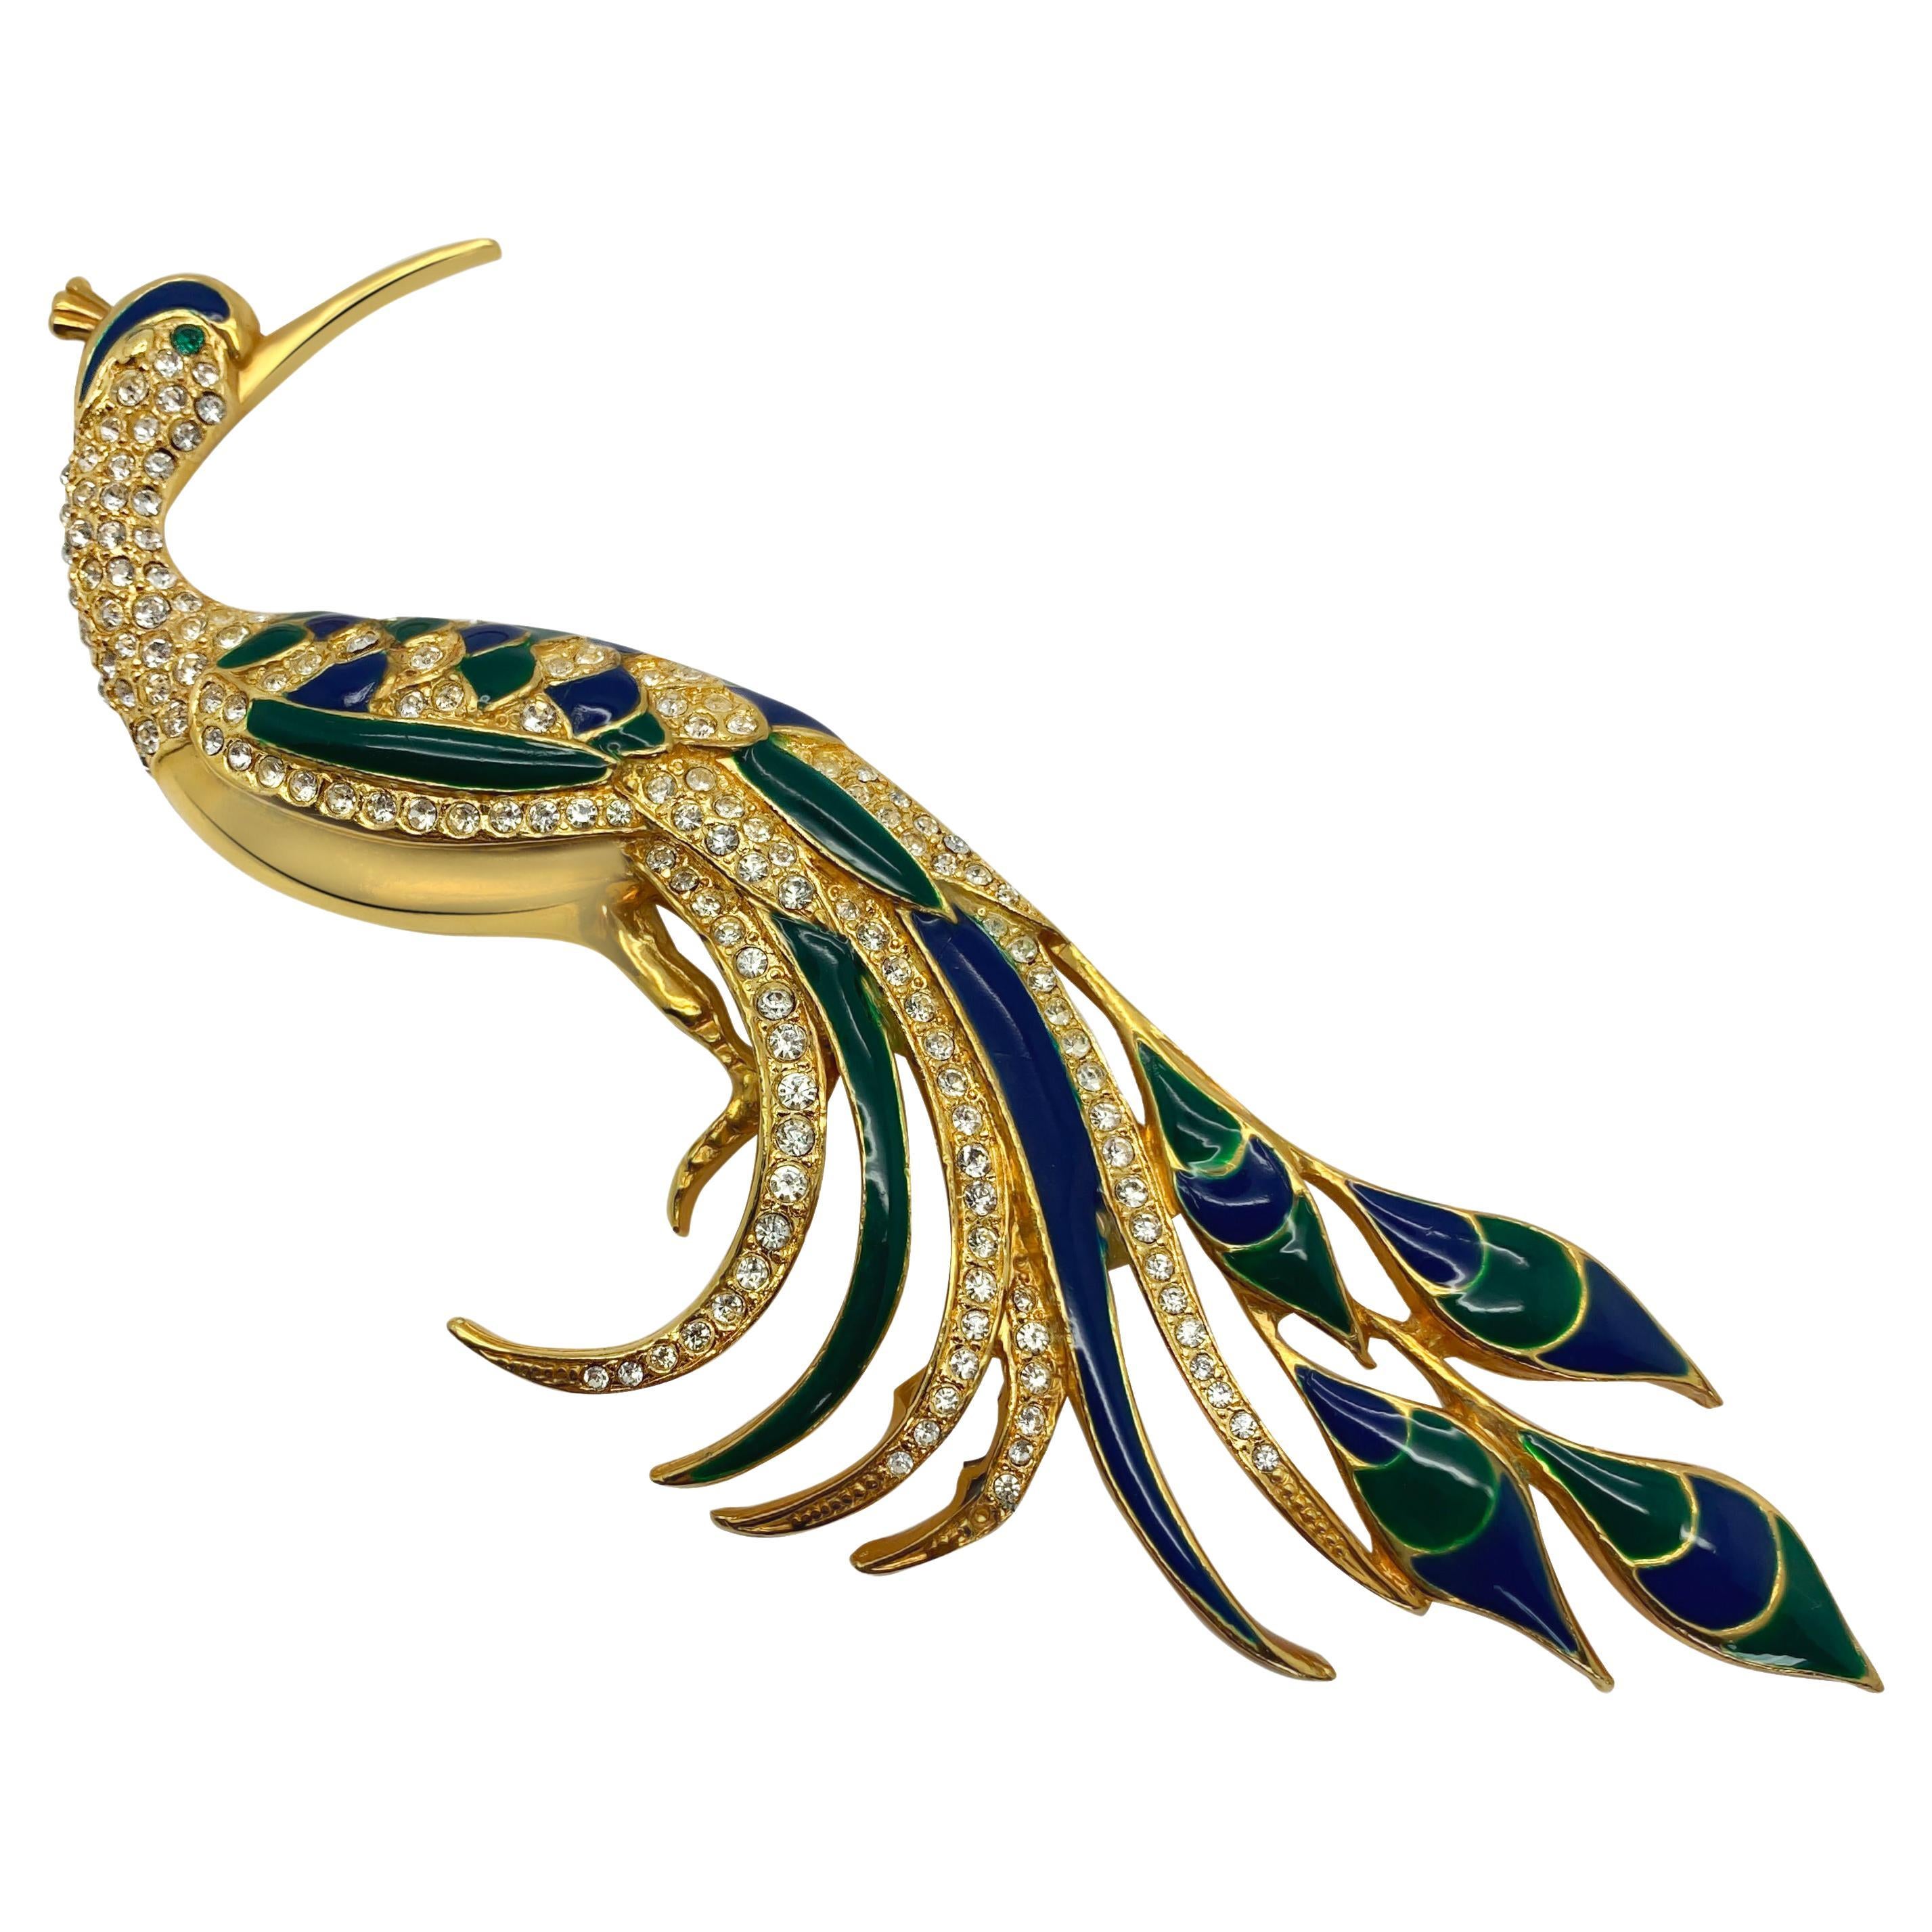 A magnificent Vintage Bird of Paradise Brooch. Featuring glorious enamelling with pave set rhinestones in a lustrous gold mount. 
Vintage Condition: Very good overall vintage condition with a couple of tiny areas of plate creasing/lift on the